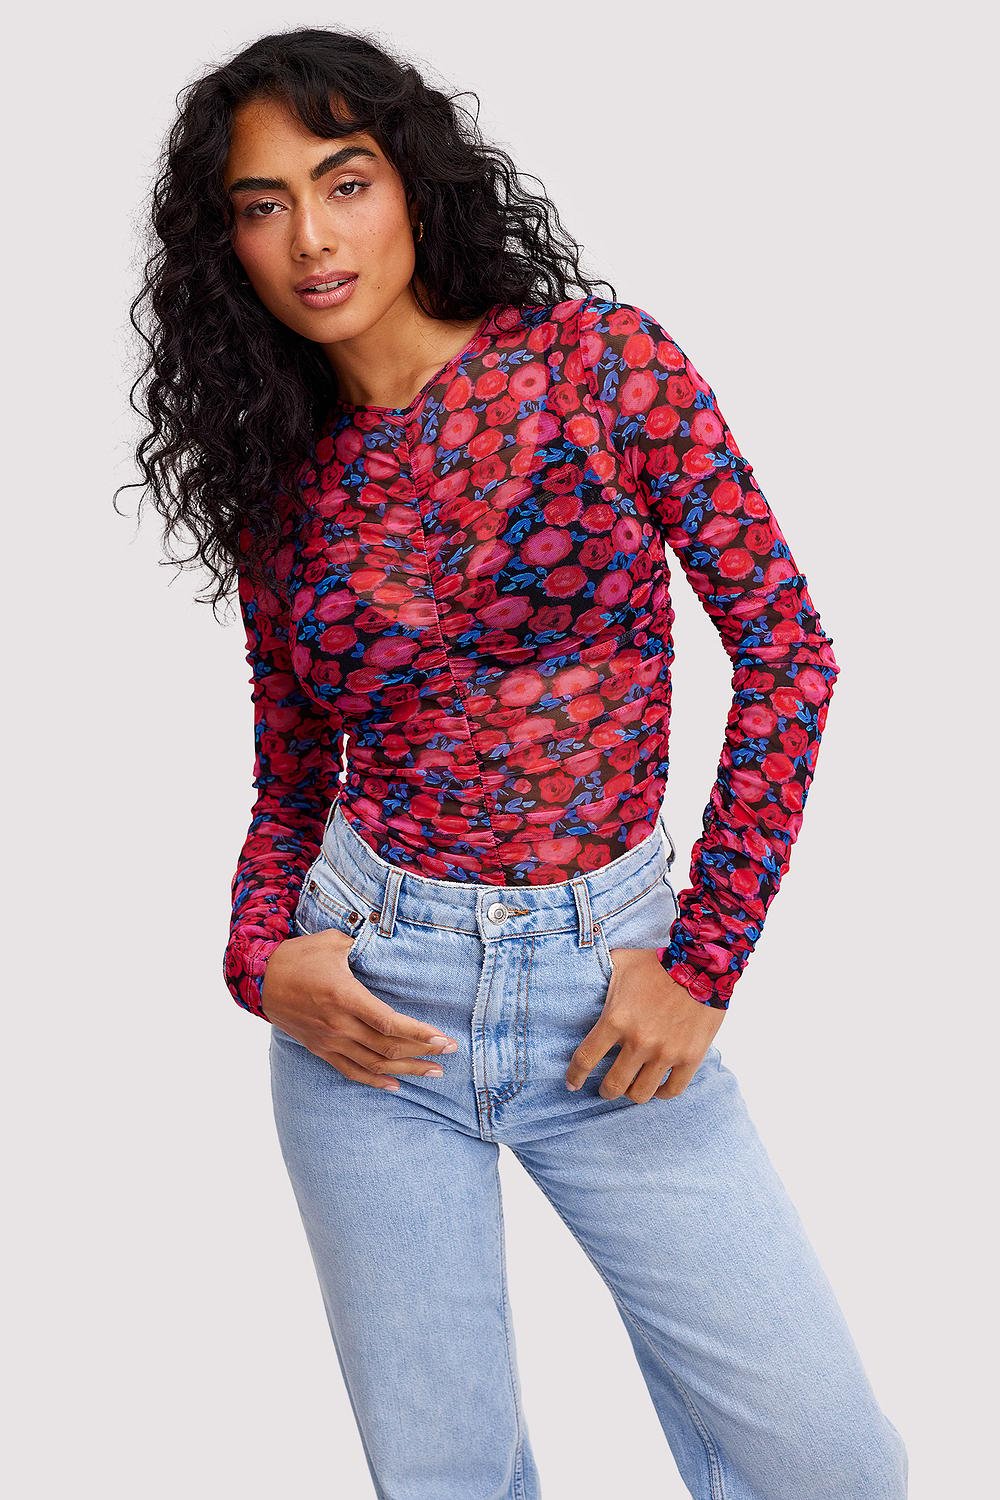 Mesh top with floral print